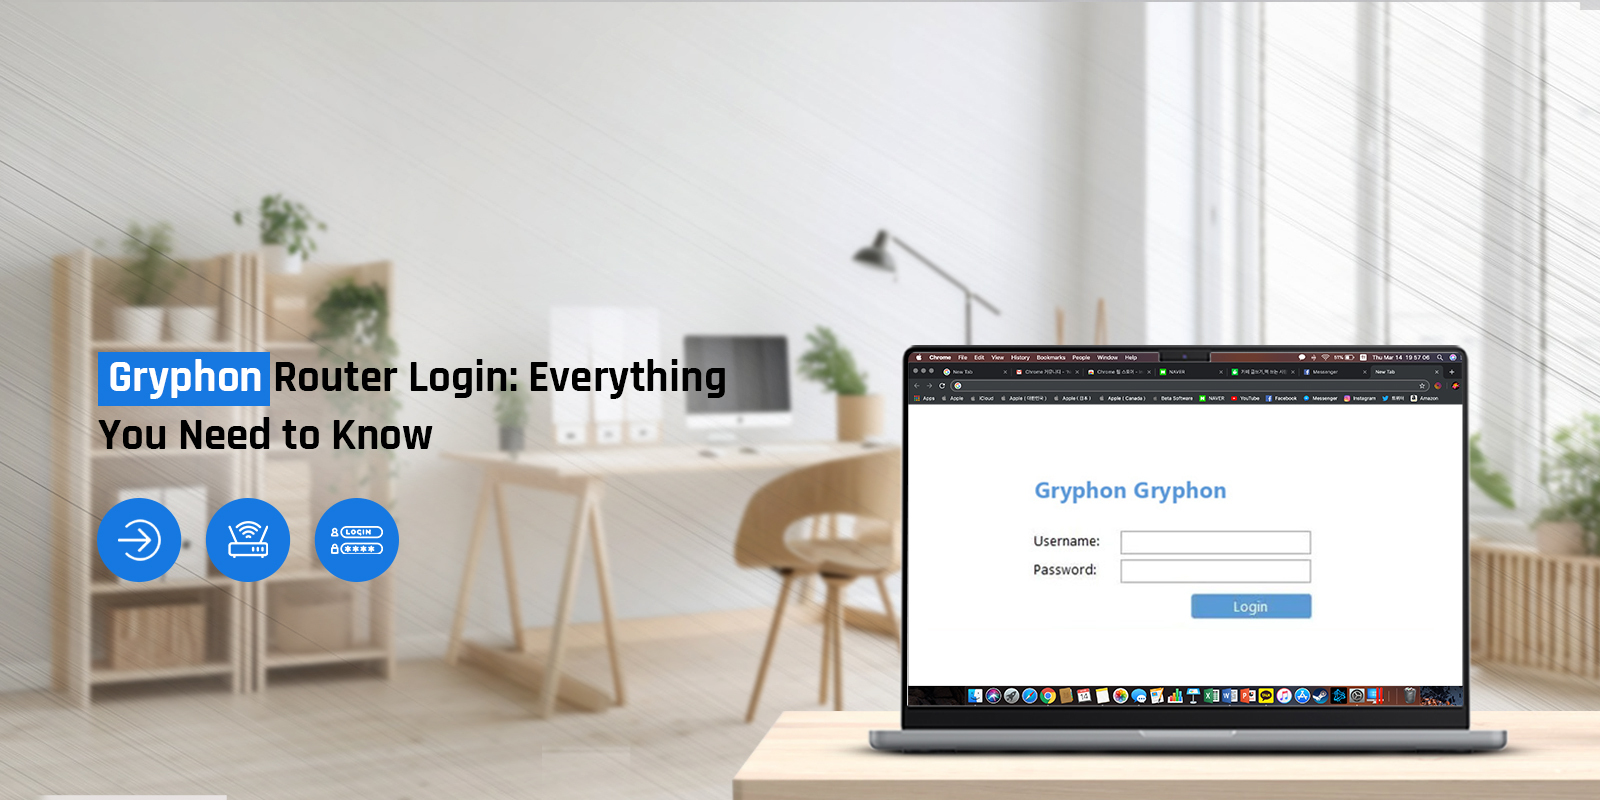 Gryphon-Router-Login-Everything-You-Need-to-Know